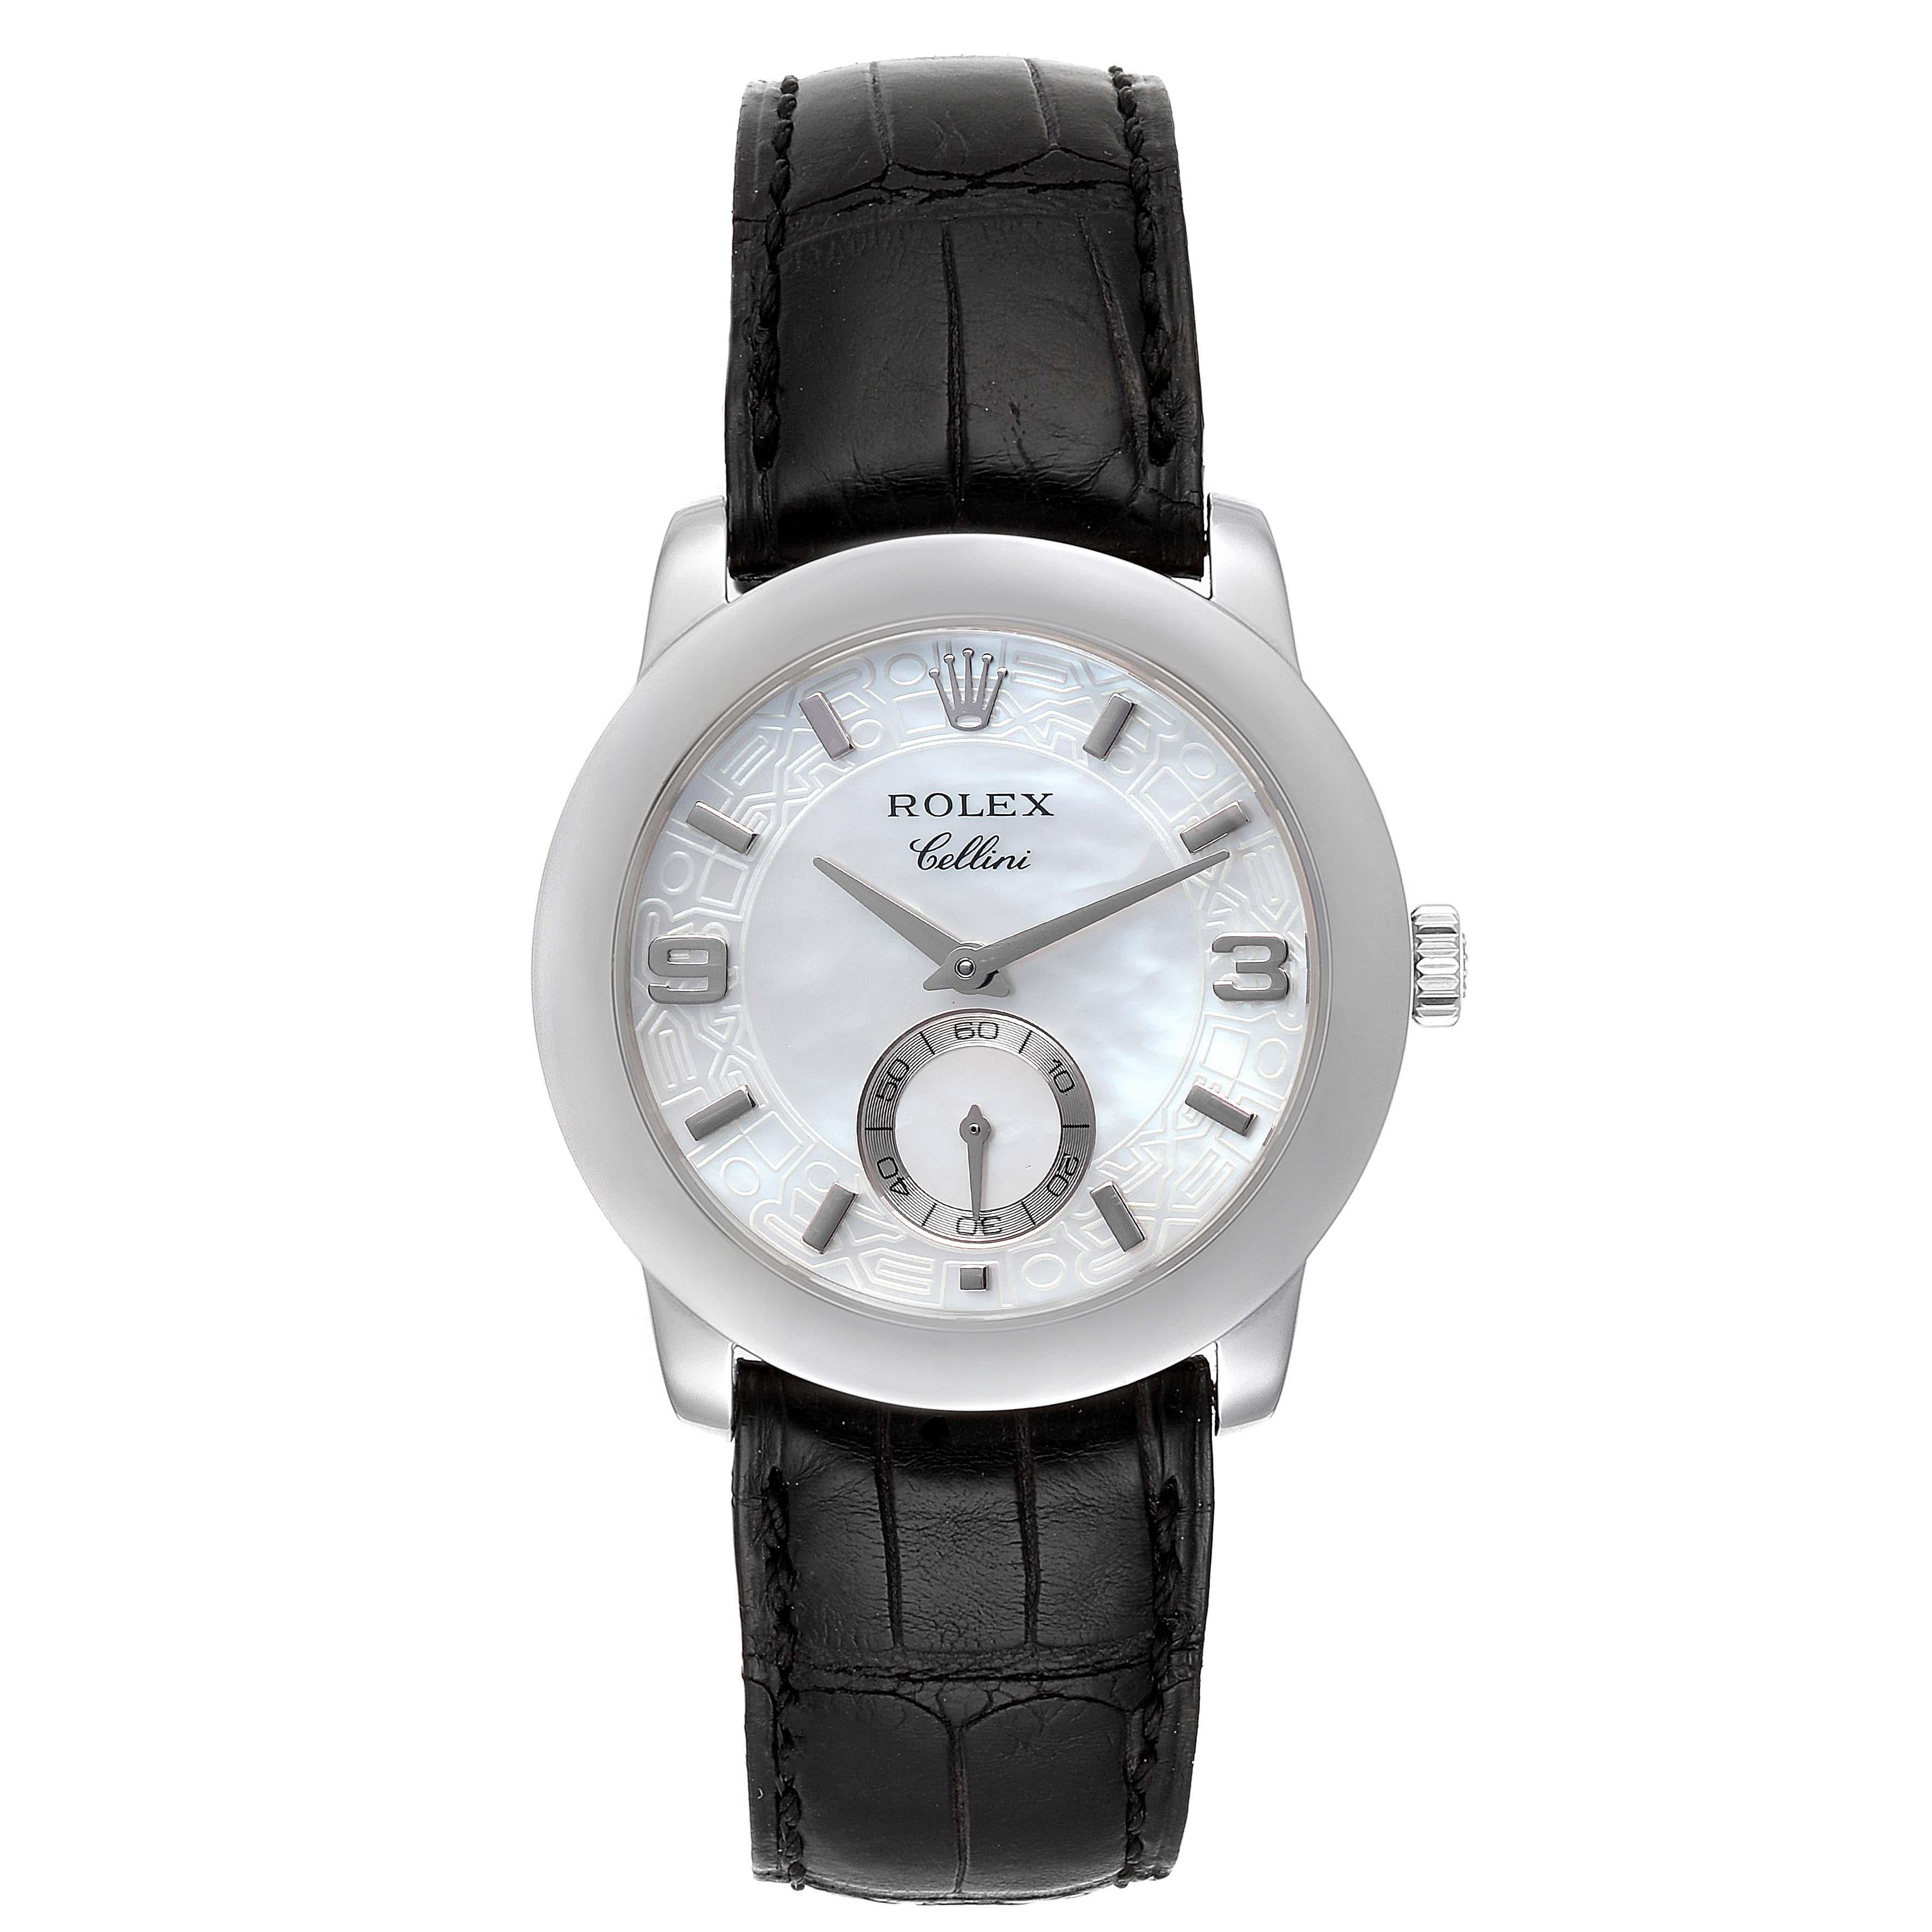 Rolex Cellini Cellinium Platinum Mother of Pearl Mens Watch 5240. Manual winding movement. Platinum case 35 mm in diameter. Rolex logo on a crown. . Scratch resistant sapphire crystal. Rolex monogram decoration mother of pearl jubilee dial with